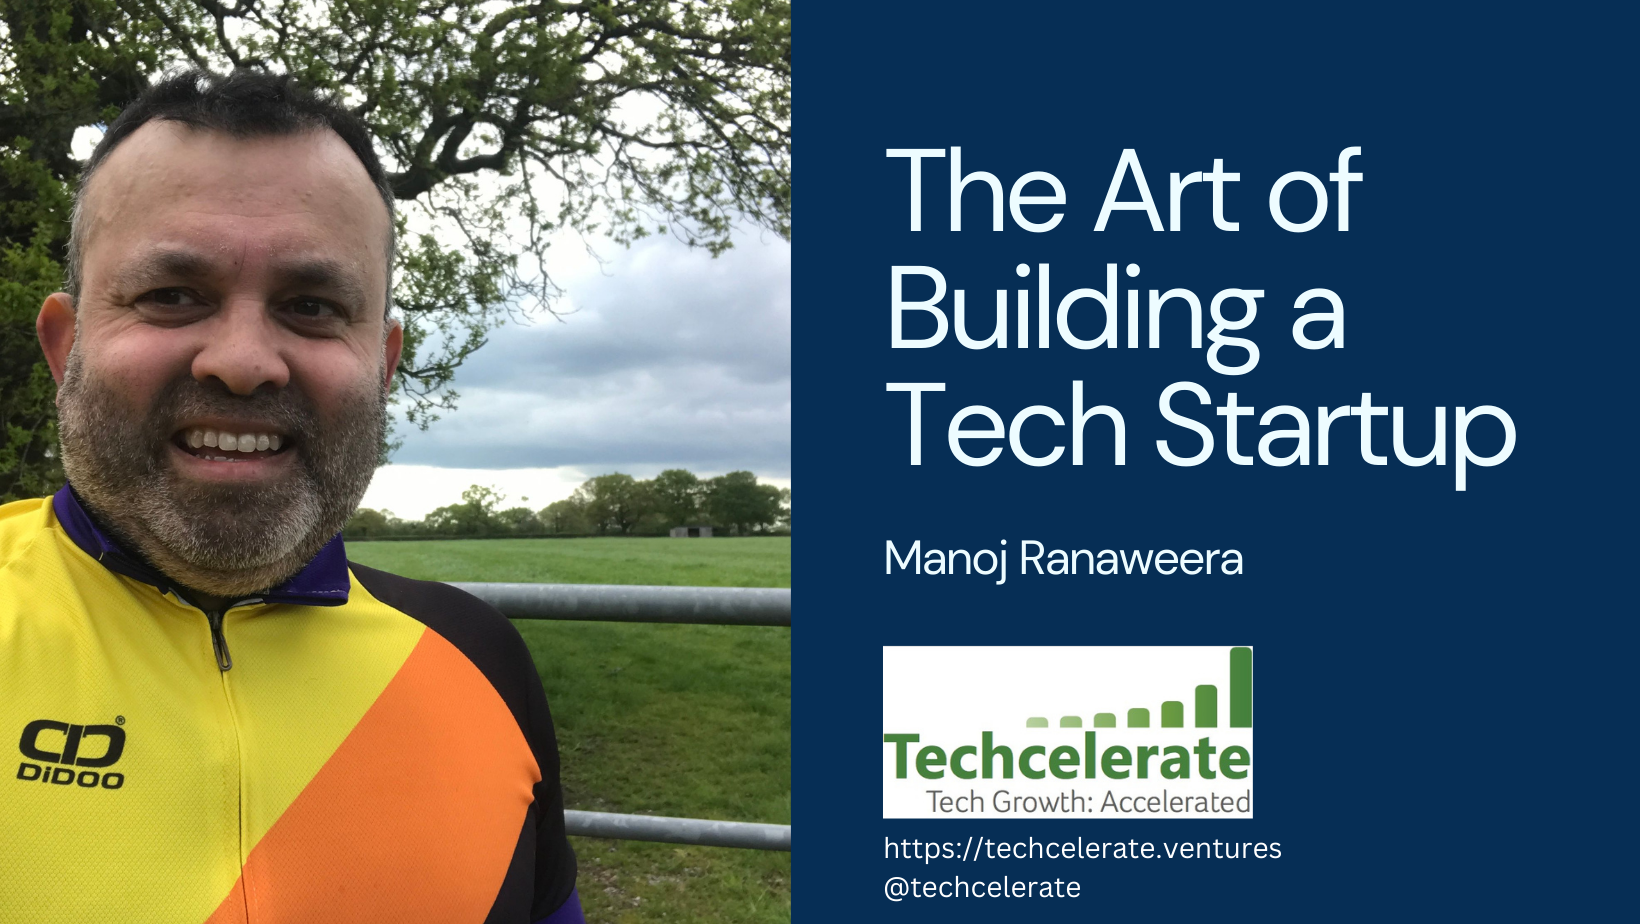 The Art of Building a Tech Startup